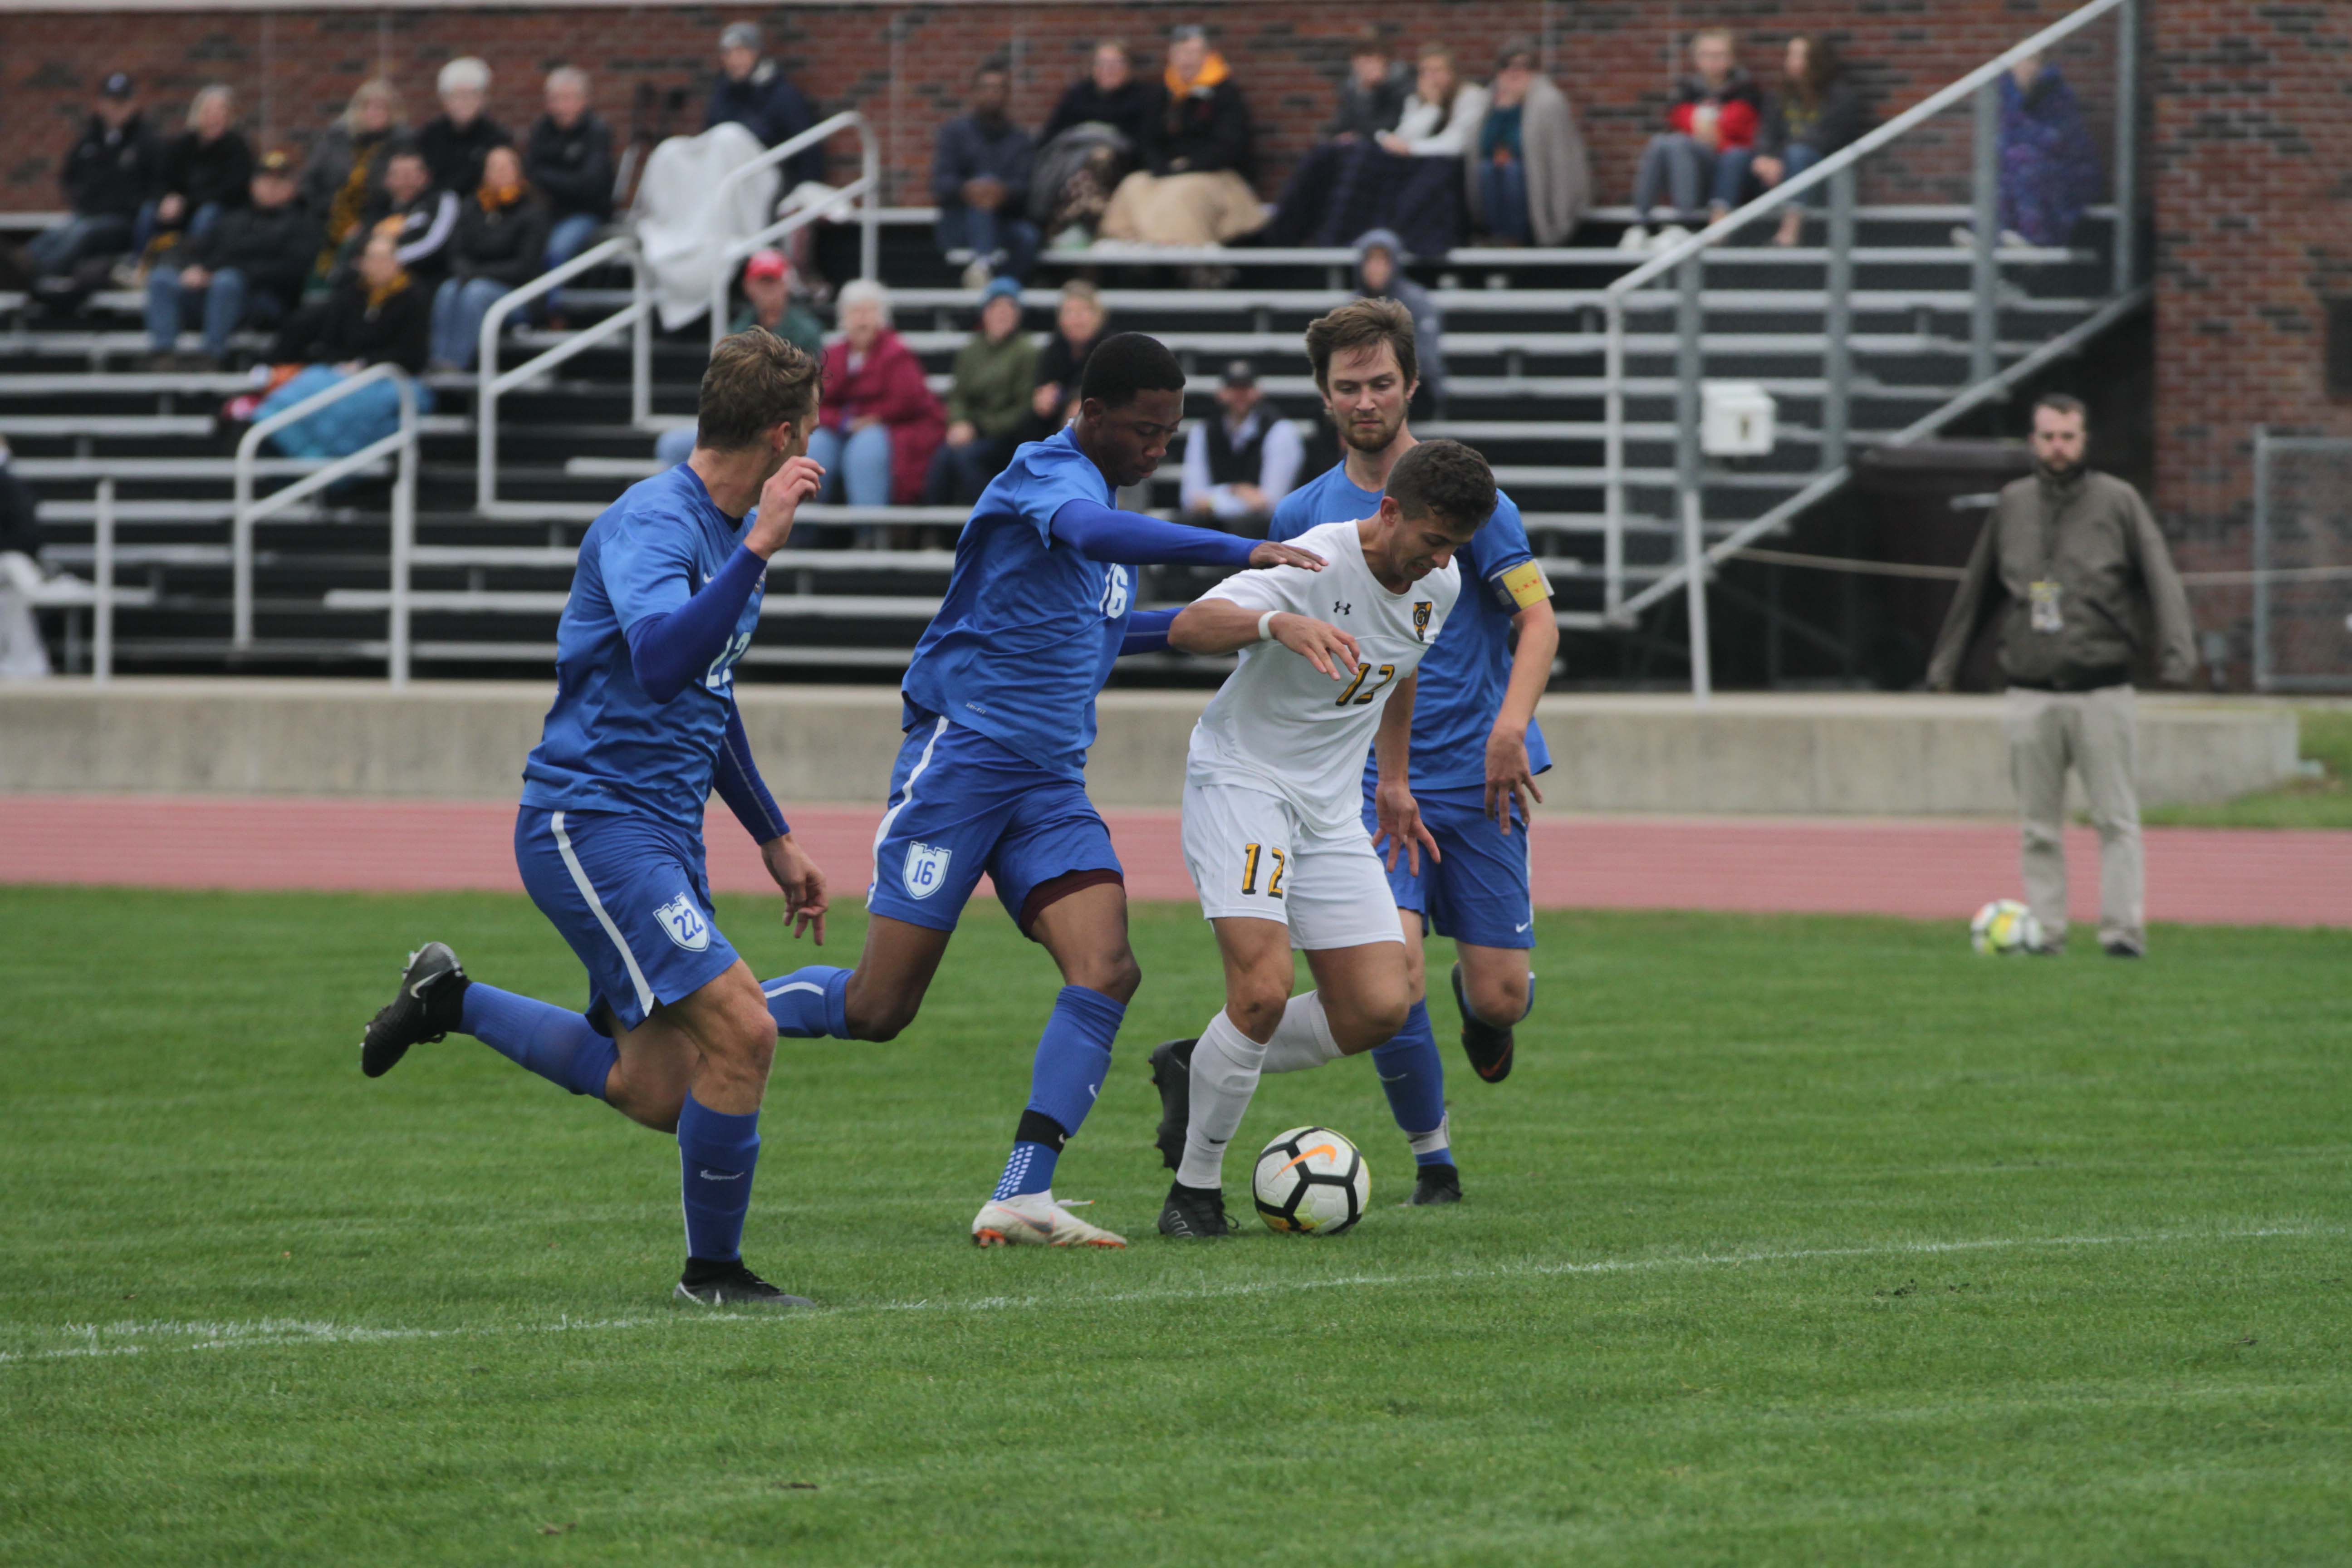 Senior Arthur Parens dribbles past St. Scholastica defenders during a game Oct. 2. The Gusties are undefeated at home this season after six games played.